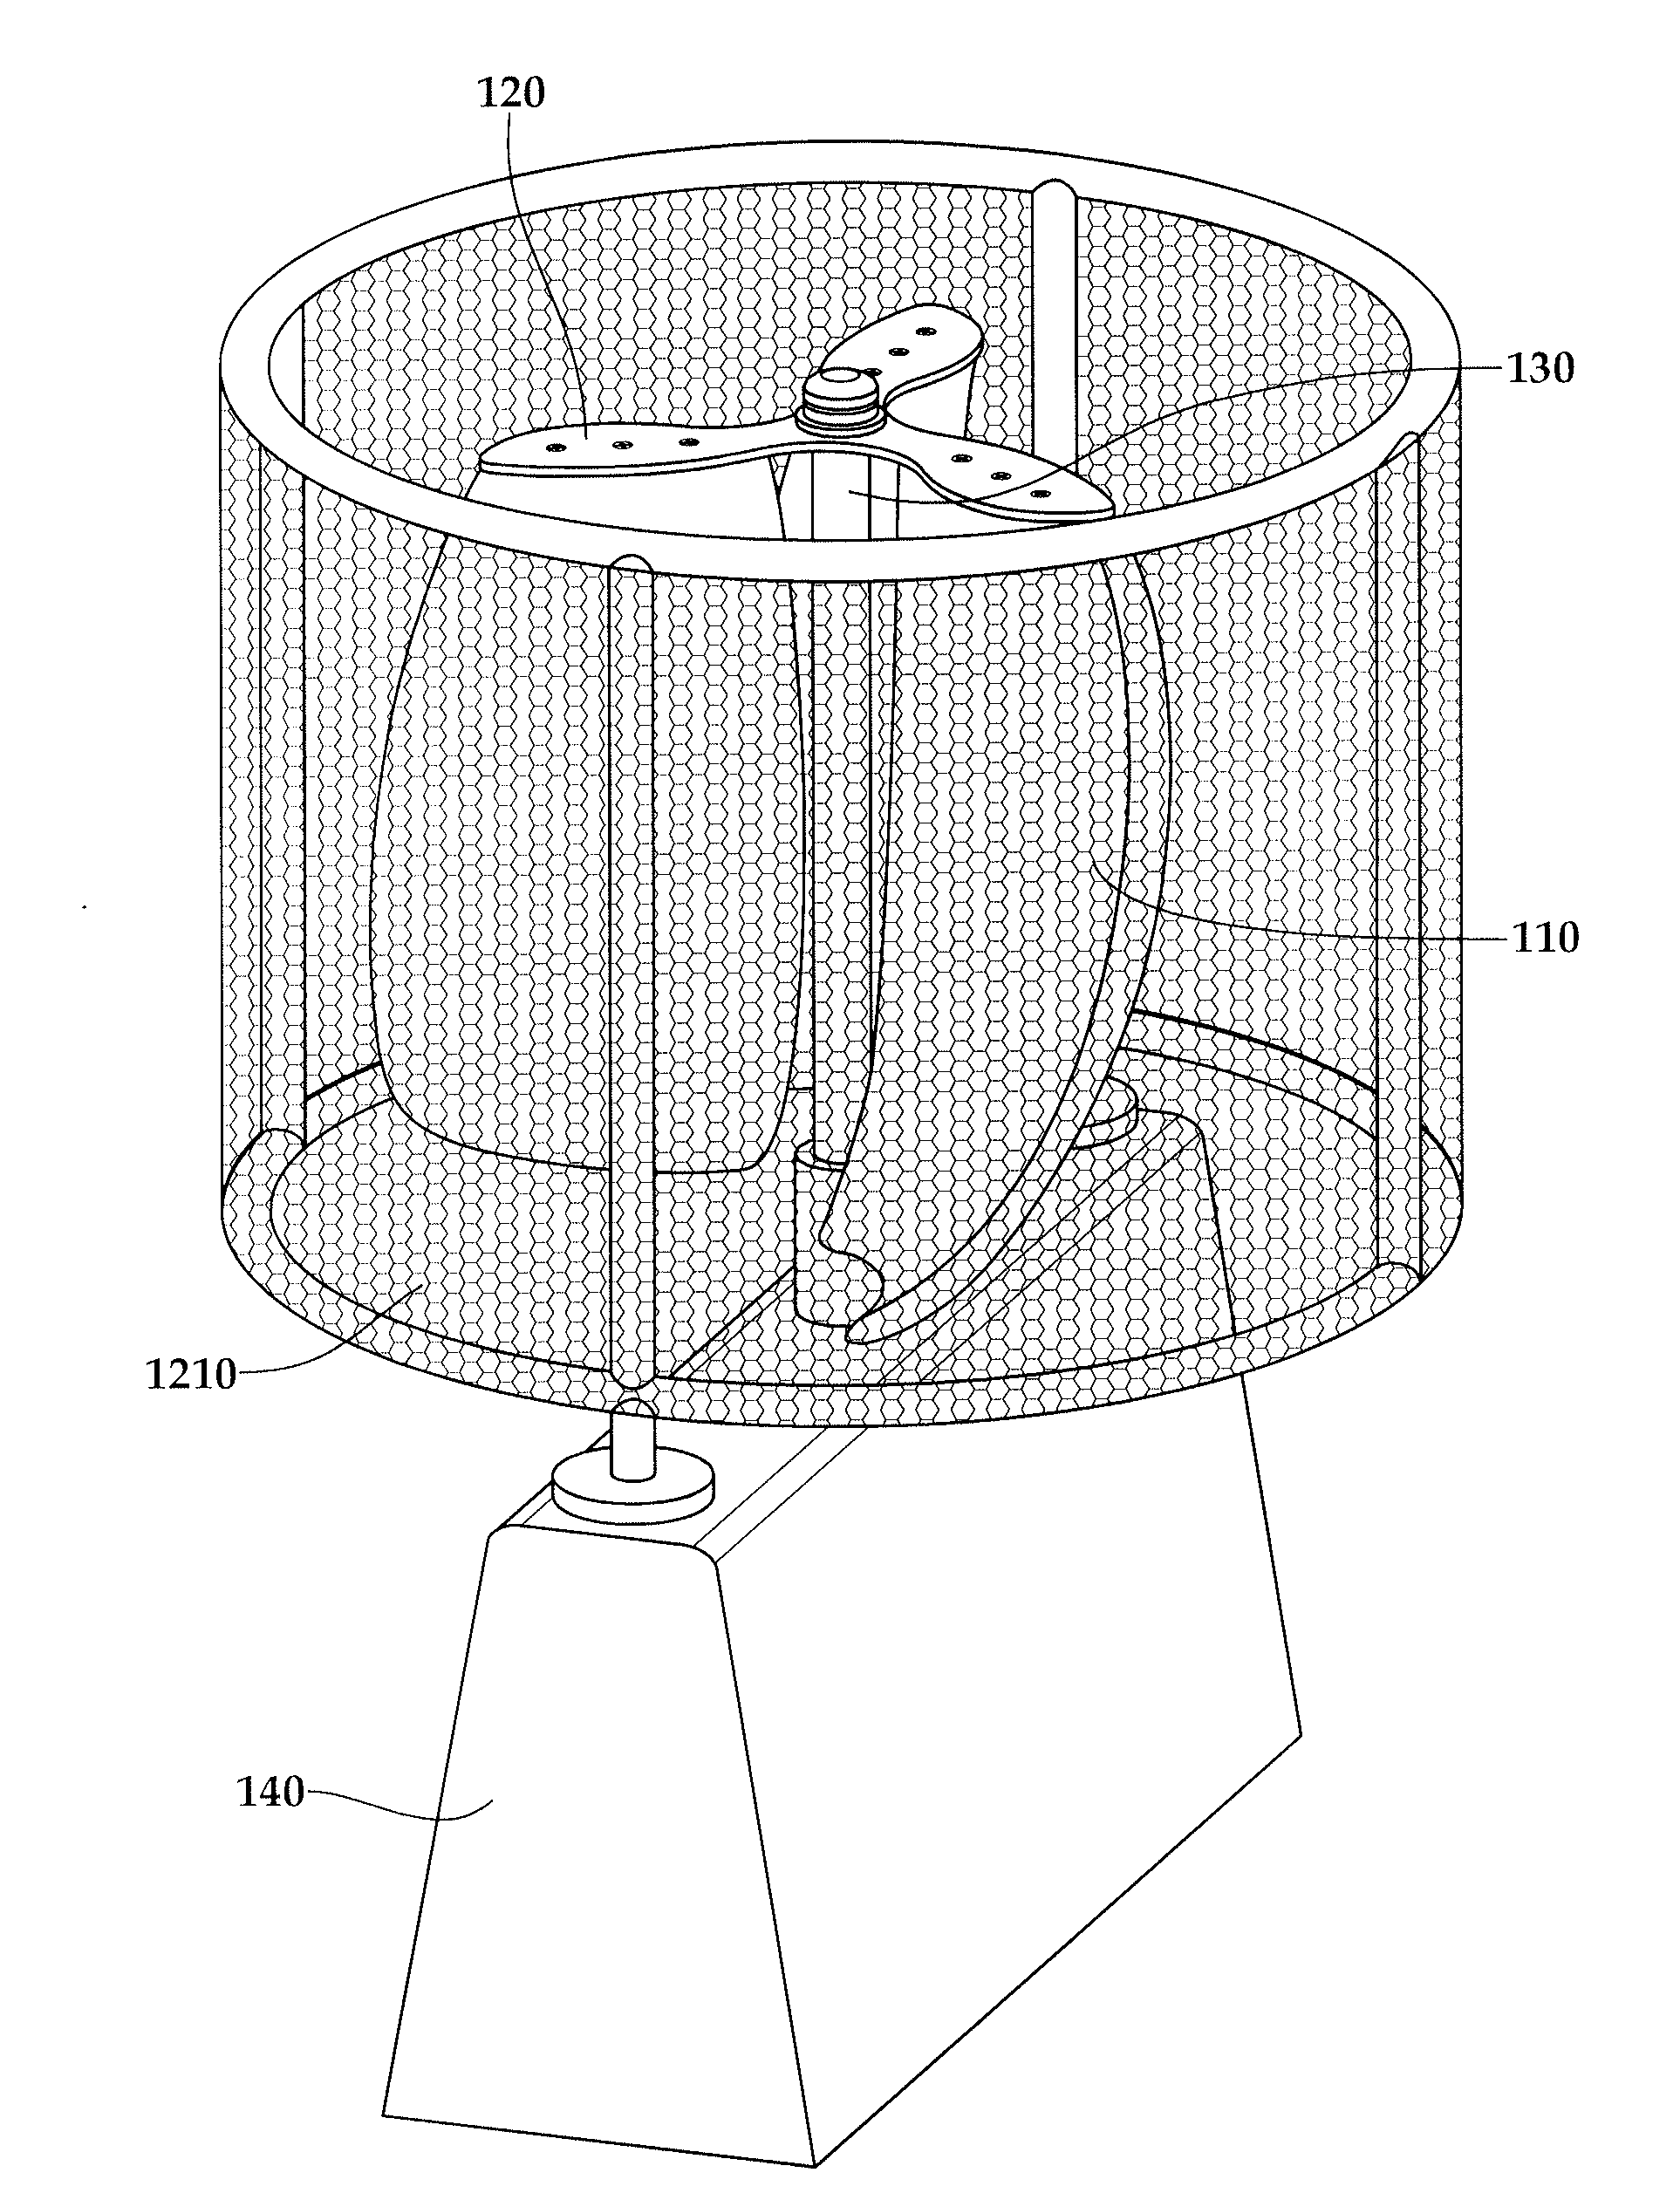 Wind power generation system and method